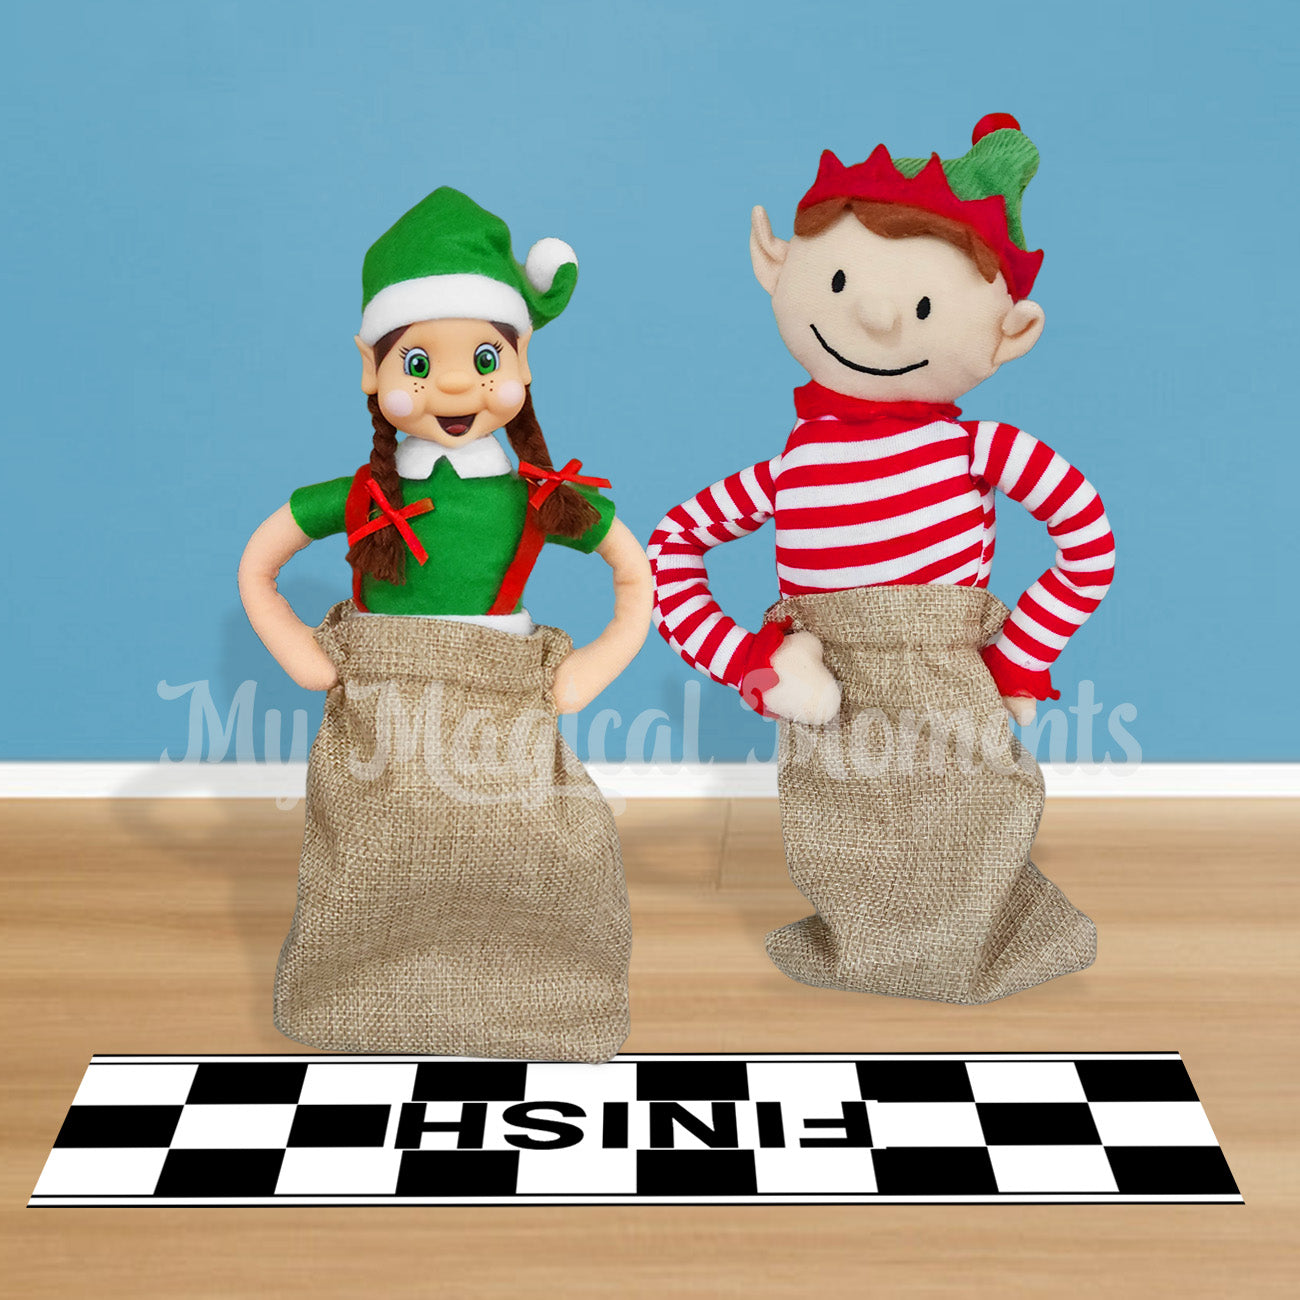 Sack Race elves racing to the finish line.